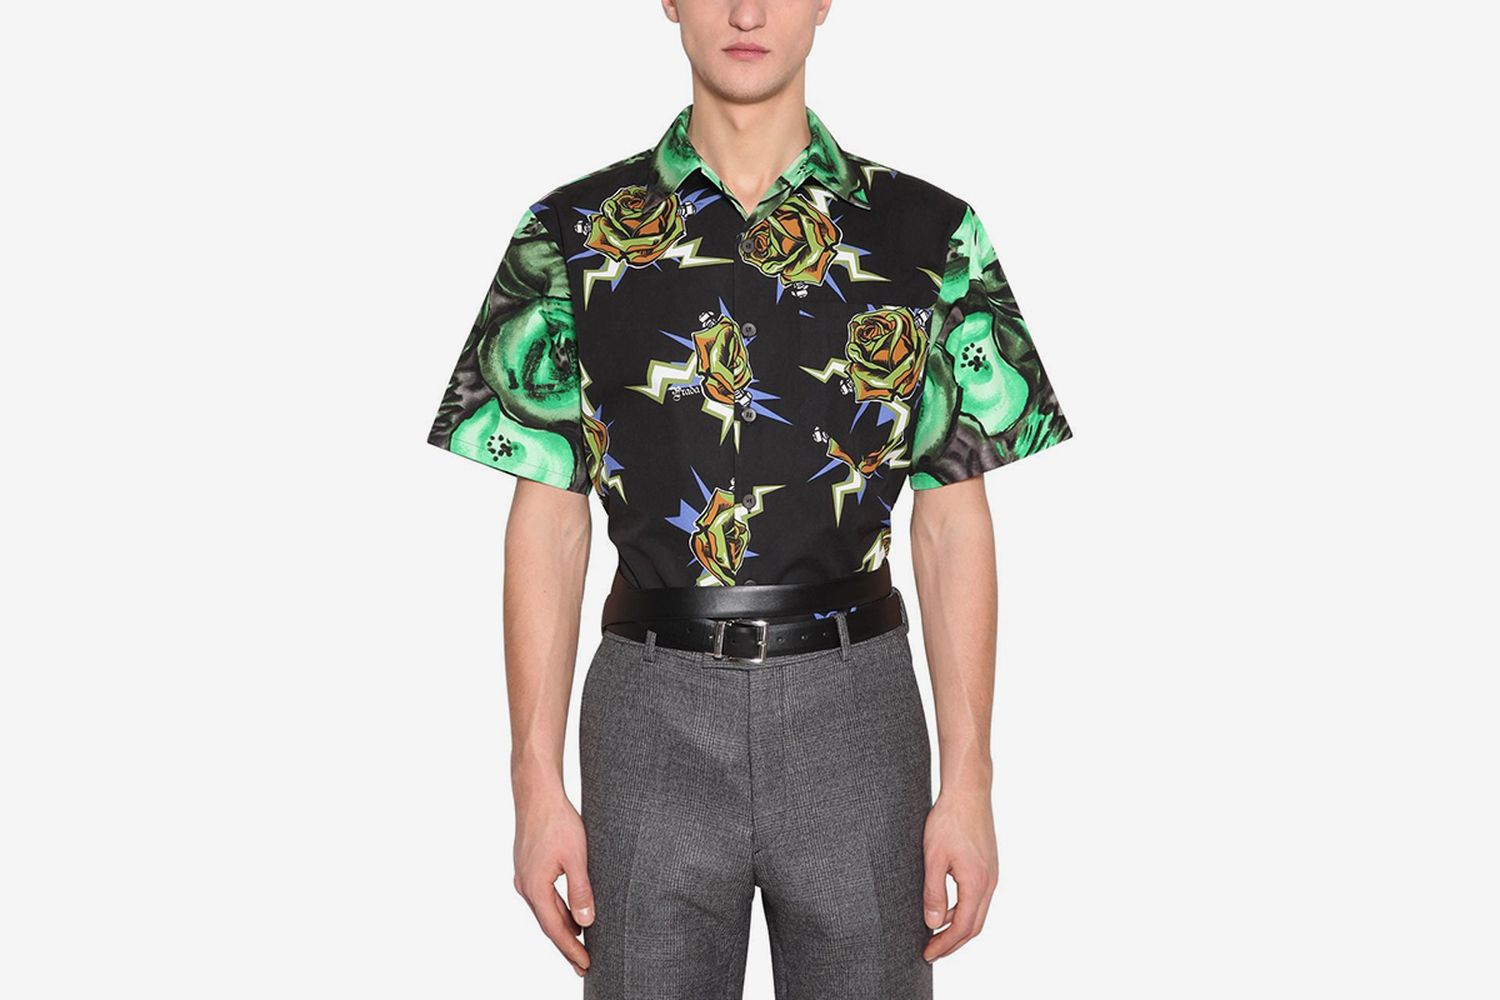 The Best of Prada's SS19 Shirts. Buy Online